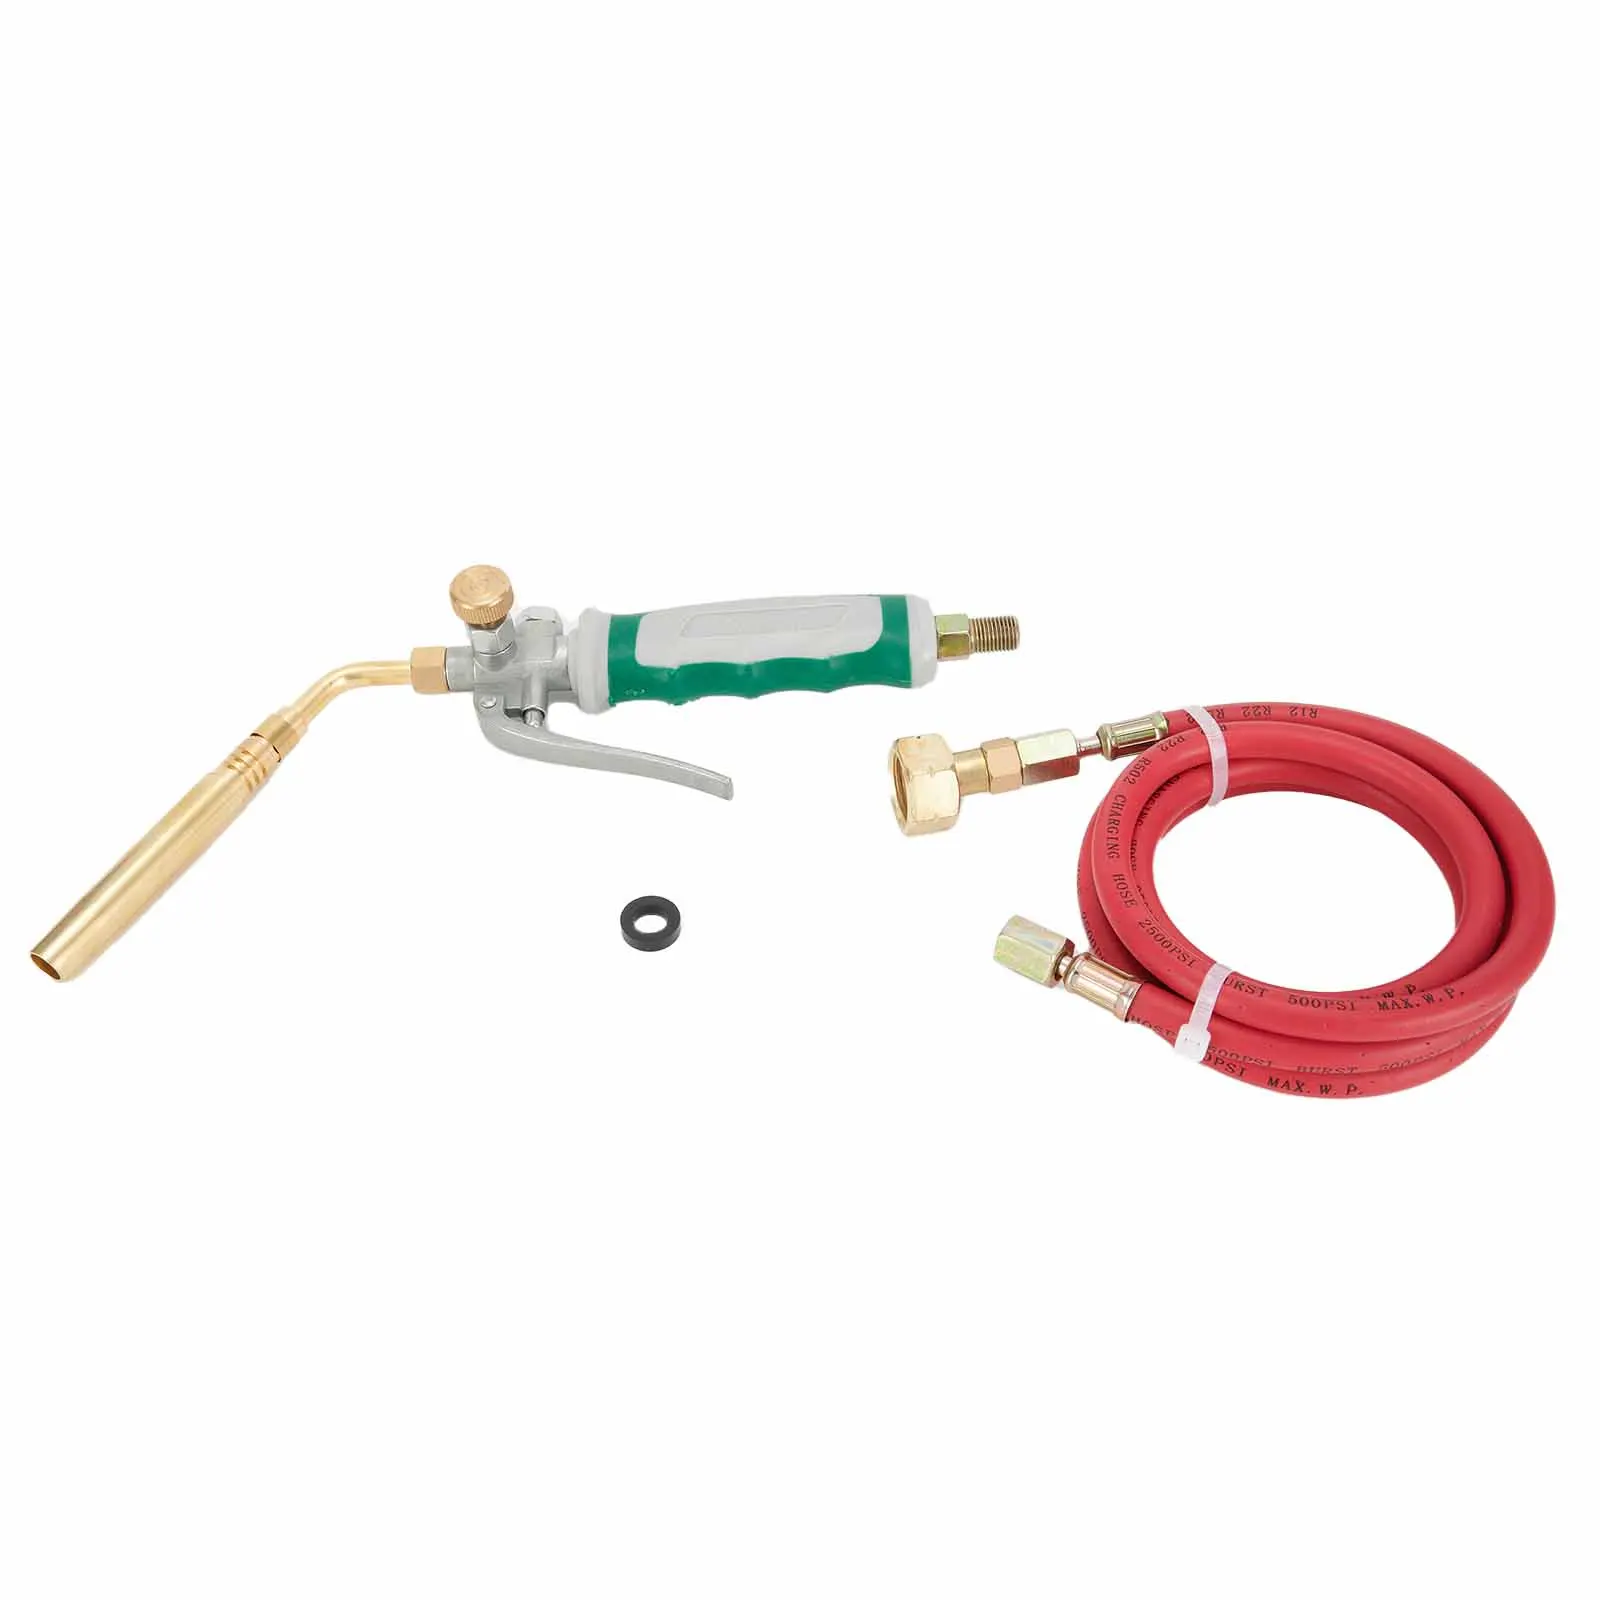 

Tool Welding Torch Outdoor Convenient Copper Adjustment Switch Brass Flamethrower For Soldering With 63inch Hose